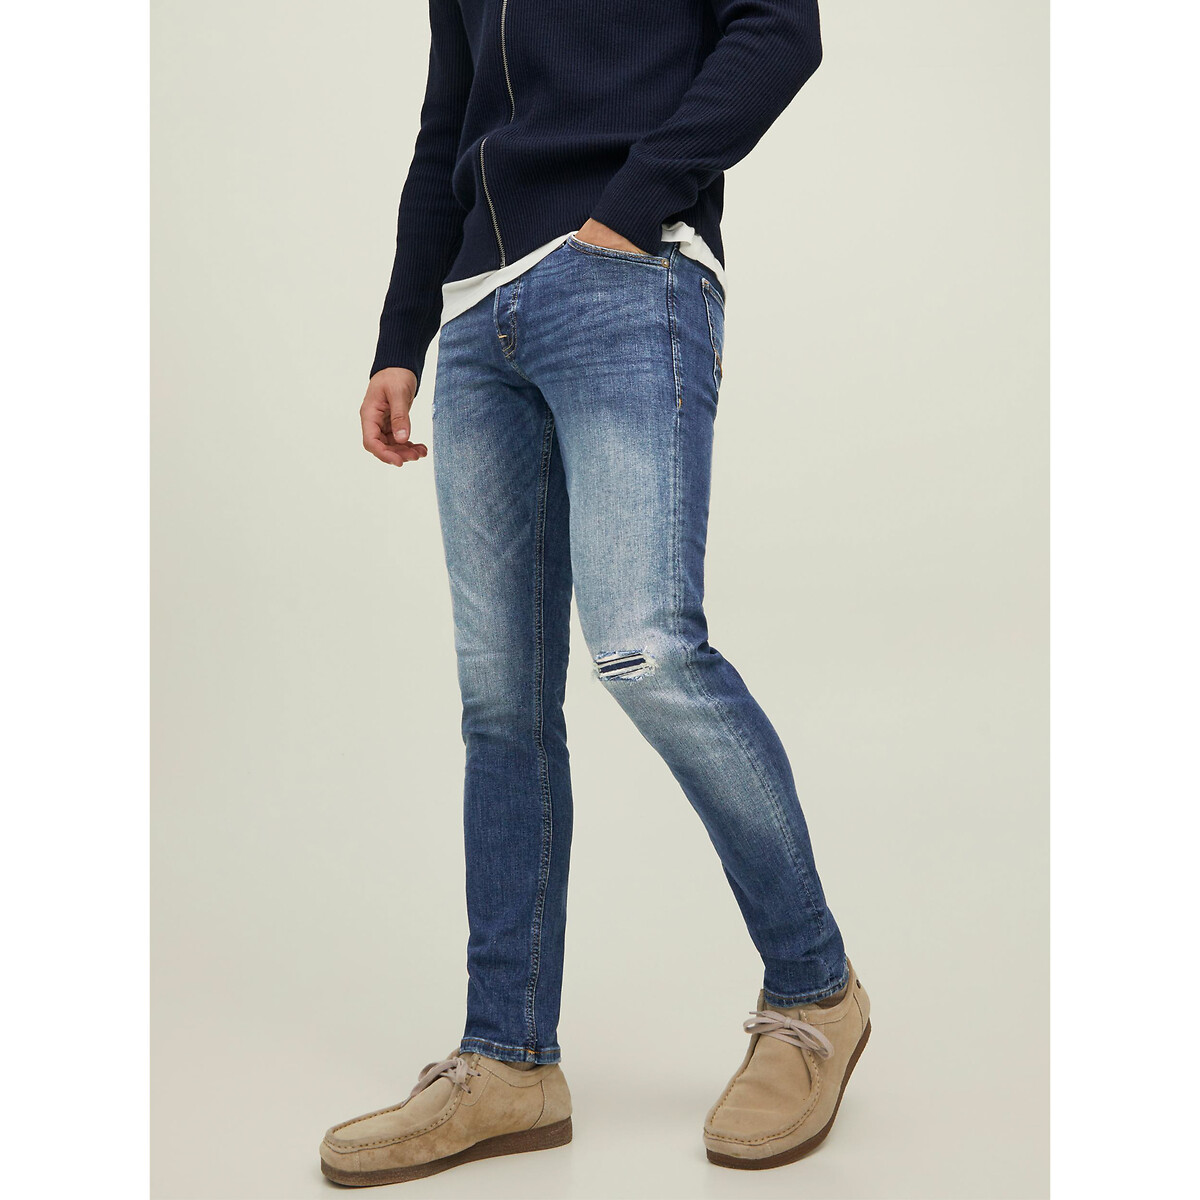 Image of Glenn Slim Stretch Jeans in Mid Rise